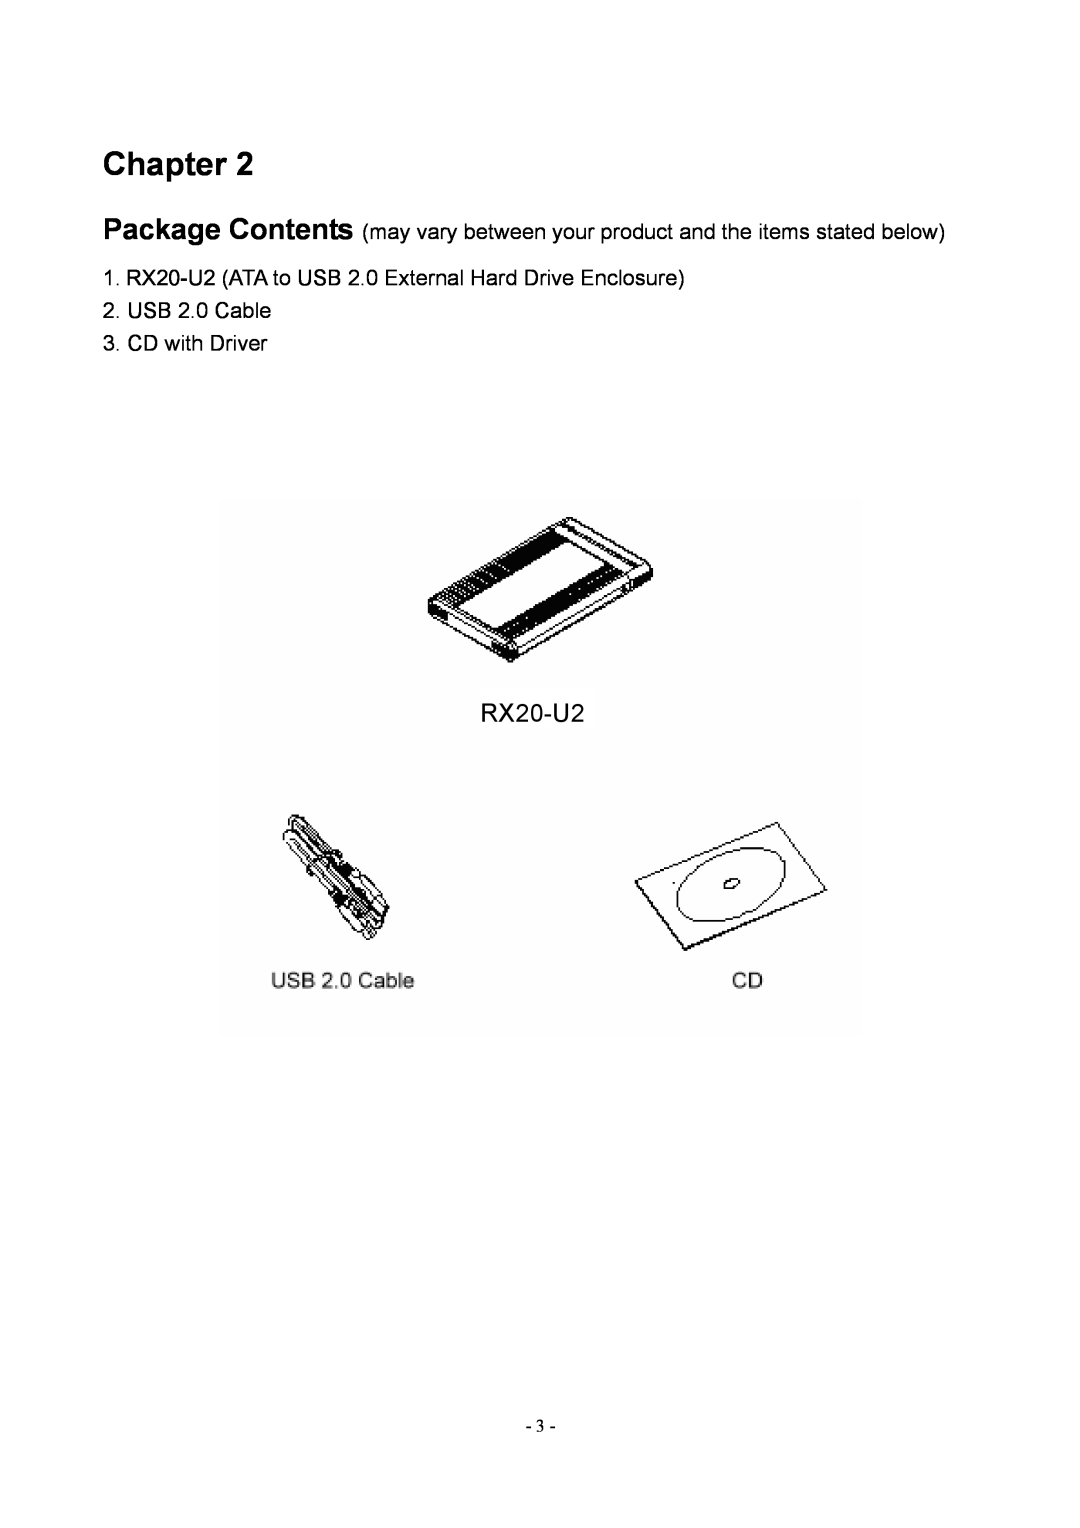 Rosewill user manual 1. RX20-U2 ATA to USB 2.0 External Hard Drive Enclosure, USB 2.0 Cable 3. CD with Driver, Chapter 